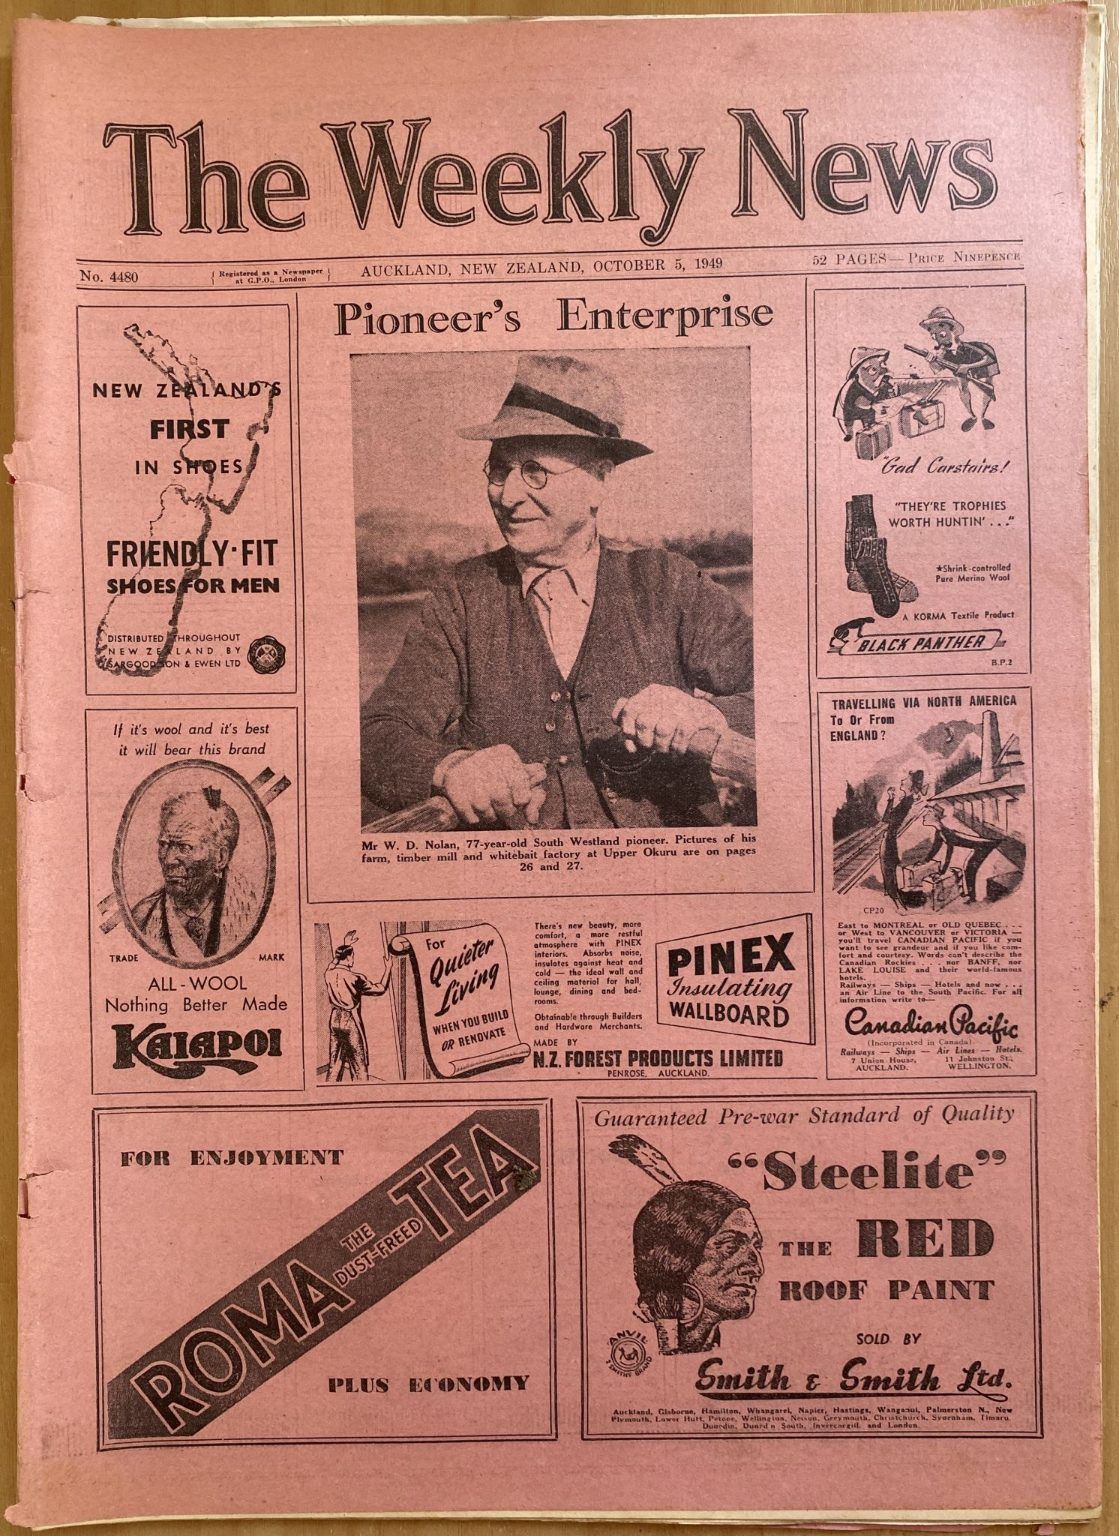 OLD NEWSPAPER: The Weekly News, No. 4480, 5 October 1949